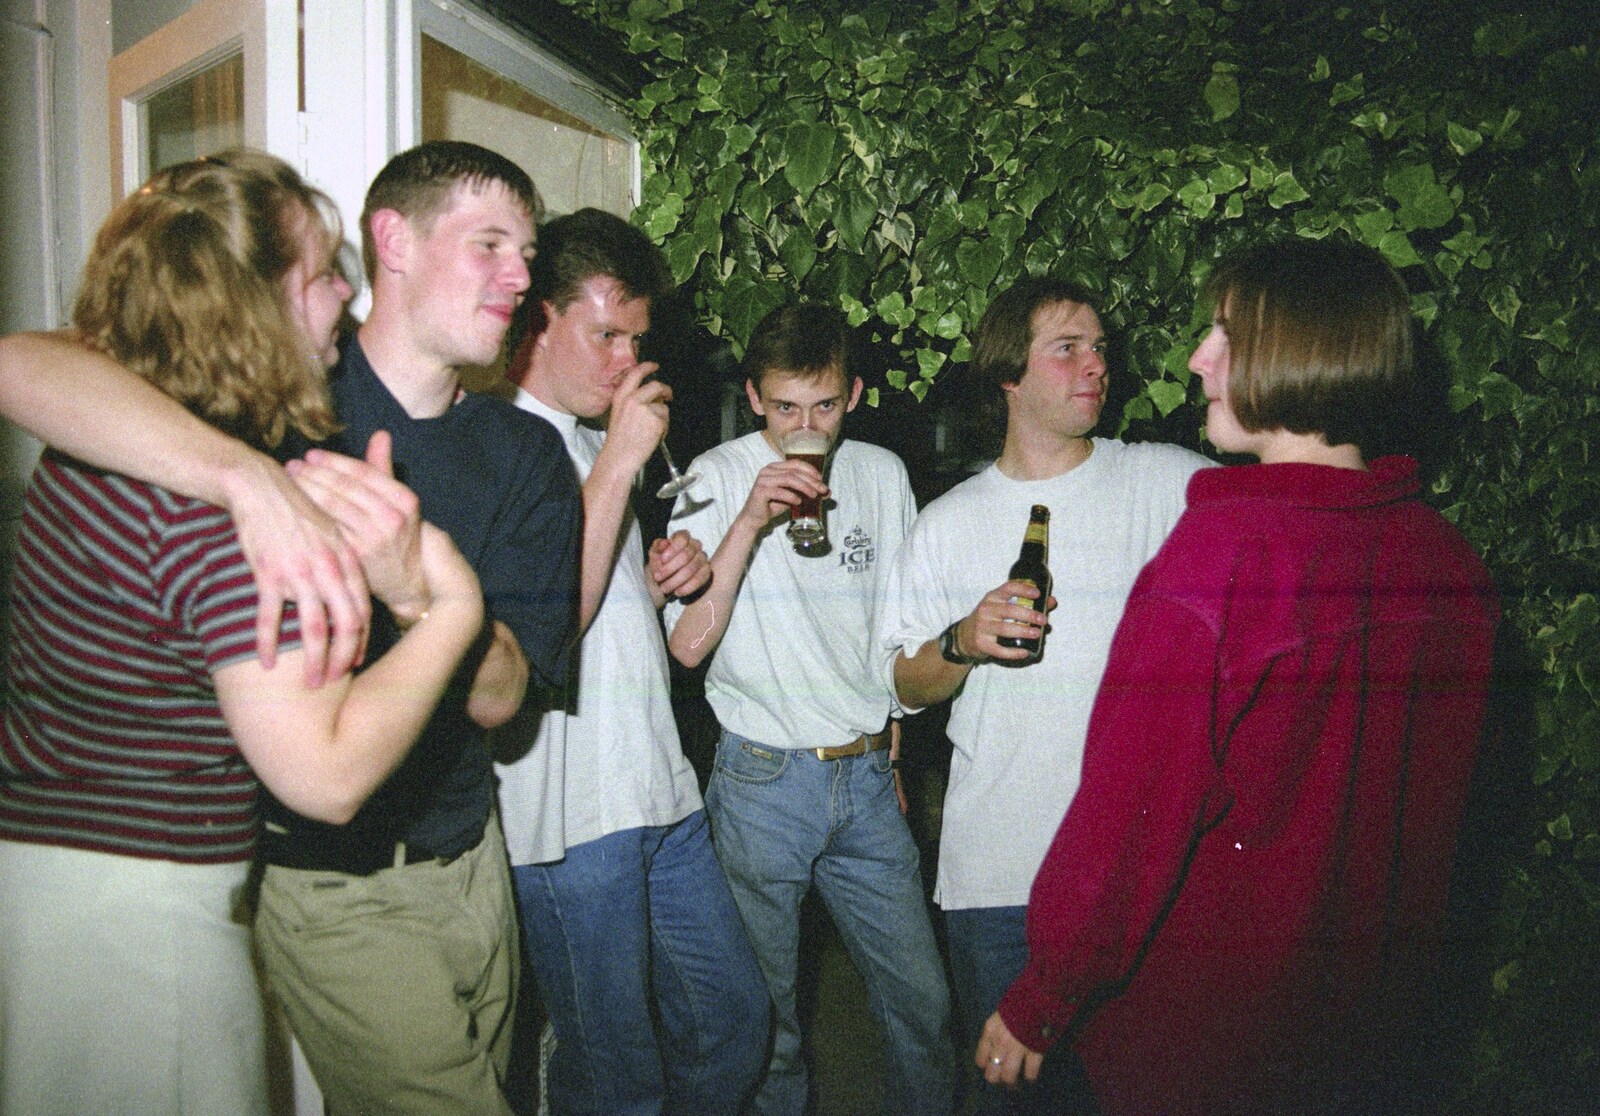 Group hug from Andrew's CISU Party, and Nosher's Garden Barbeque, Ipswich and Brome, Suffolk - June 10th 1998